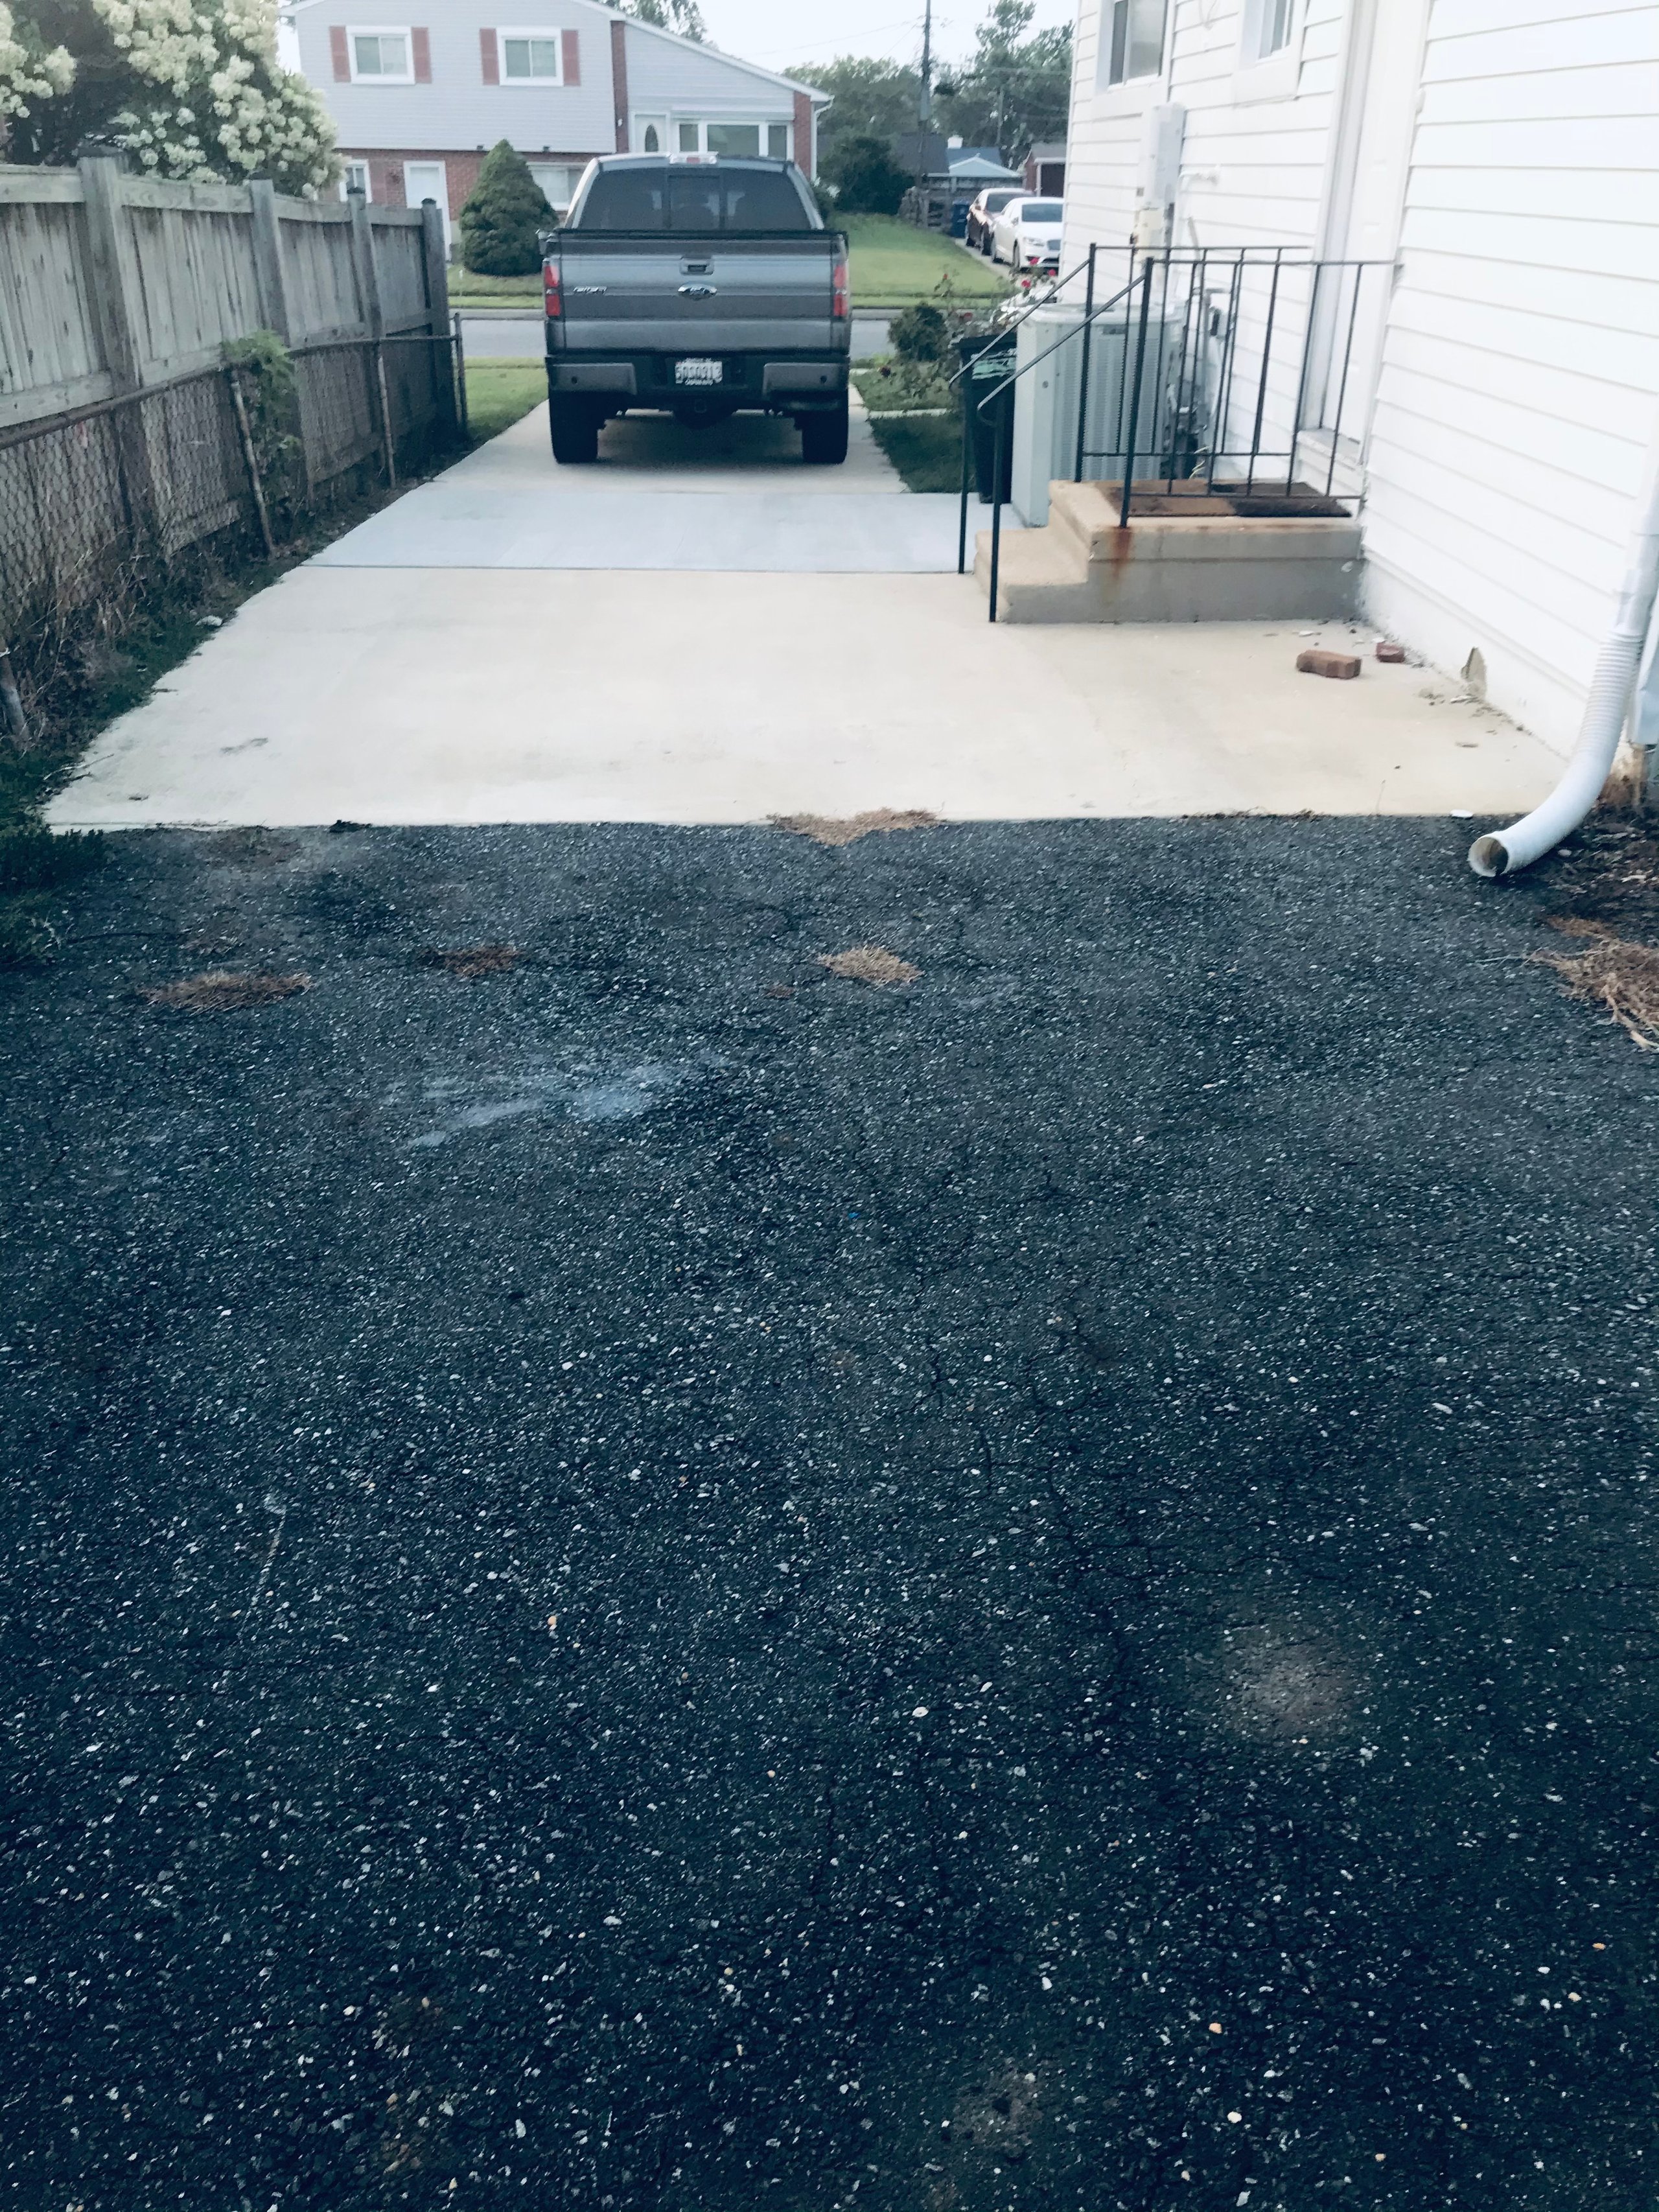 75x10 Driveway self storage unit in Catonsville, MD